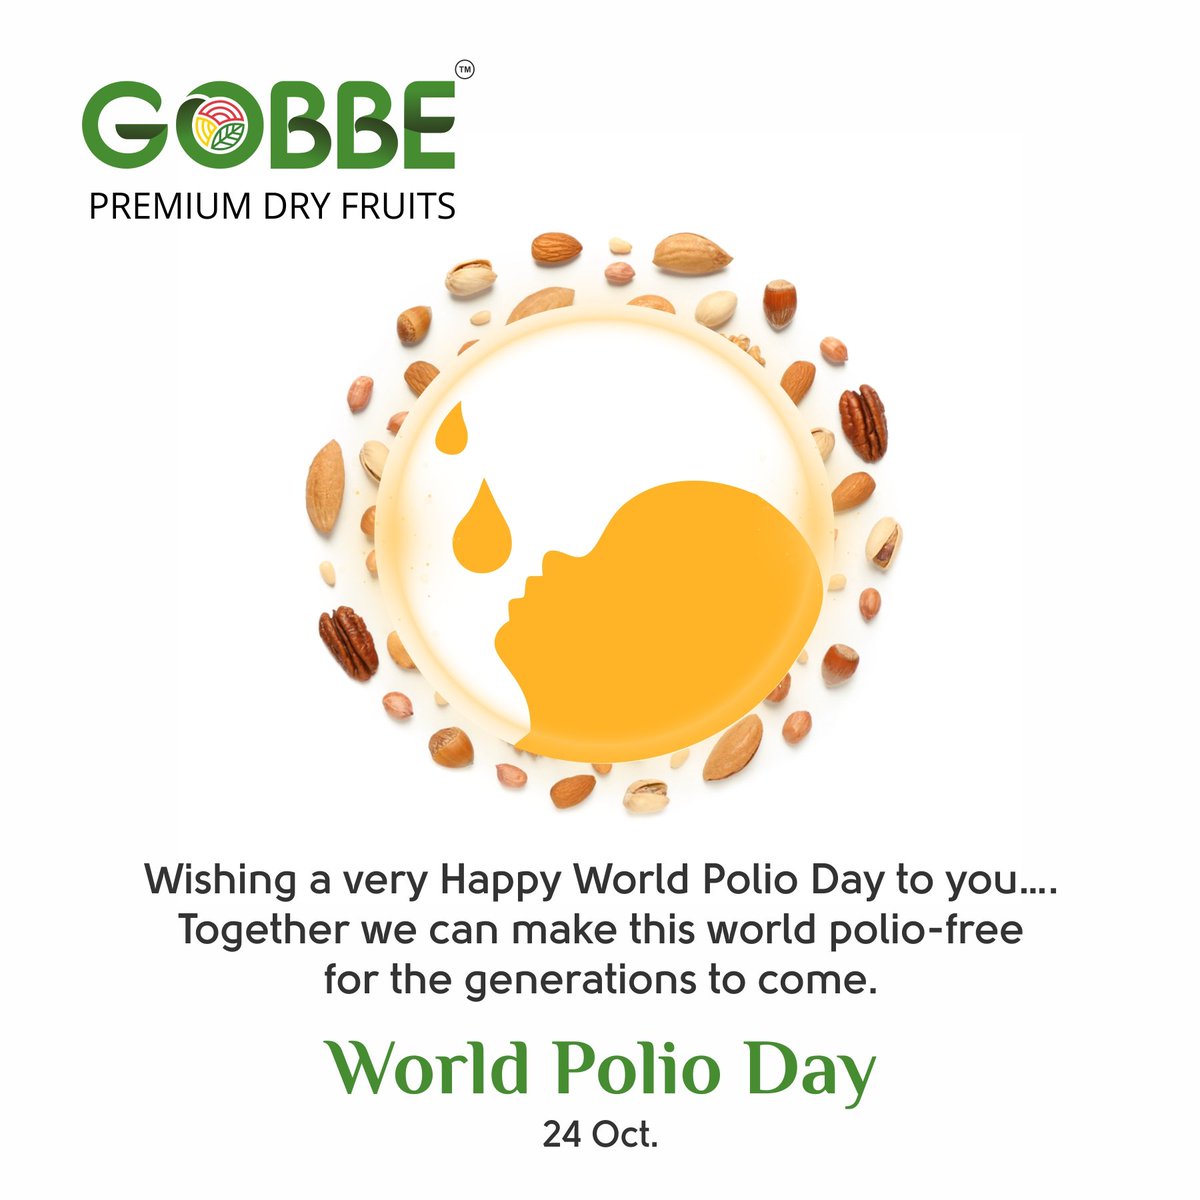 Vaccines save lives. On World Polio Day, let's stand up for the power of vaccination and a healthier world.

#WorldPolioDay #EndPolio #PolioFreeWorld
#VaccinationMatters
#PolioFreeFuture #Immunization
#HealthForAll #PolioDay2023
#Gobbe #GobbePremiumDryFruits
#GobbeSnacking